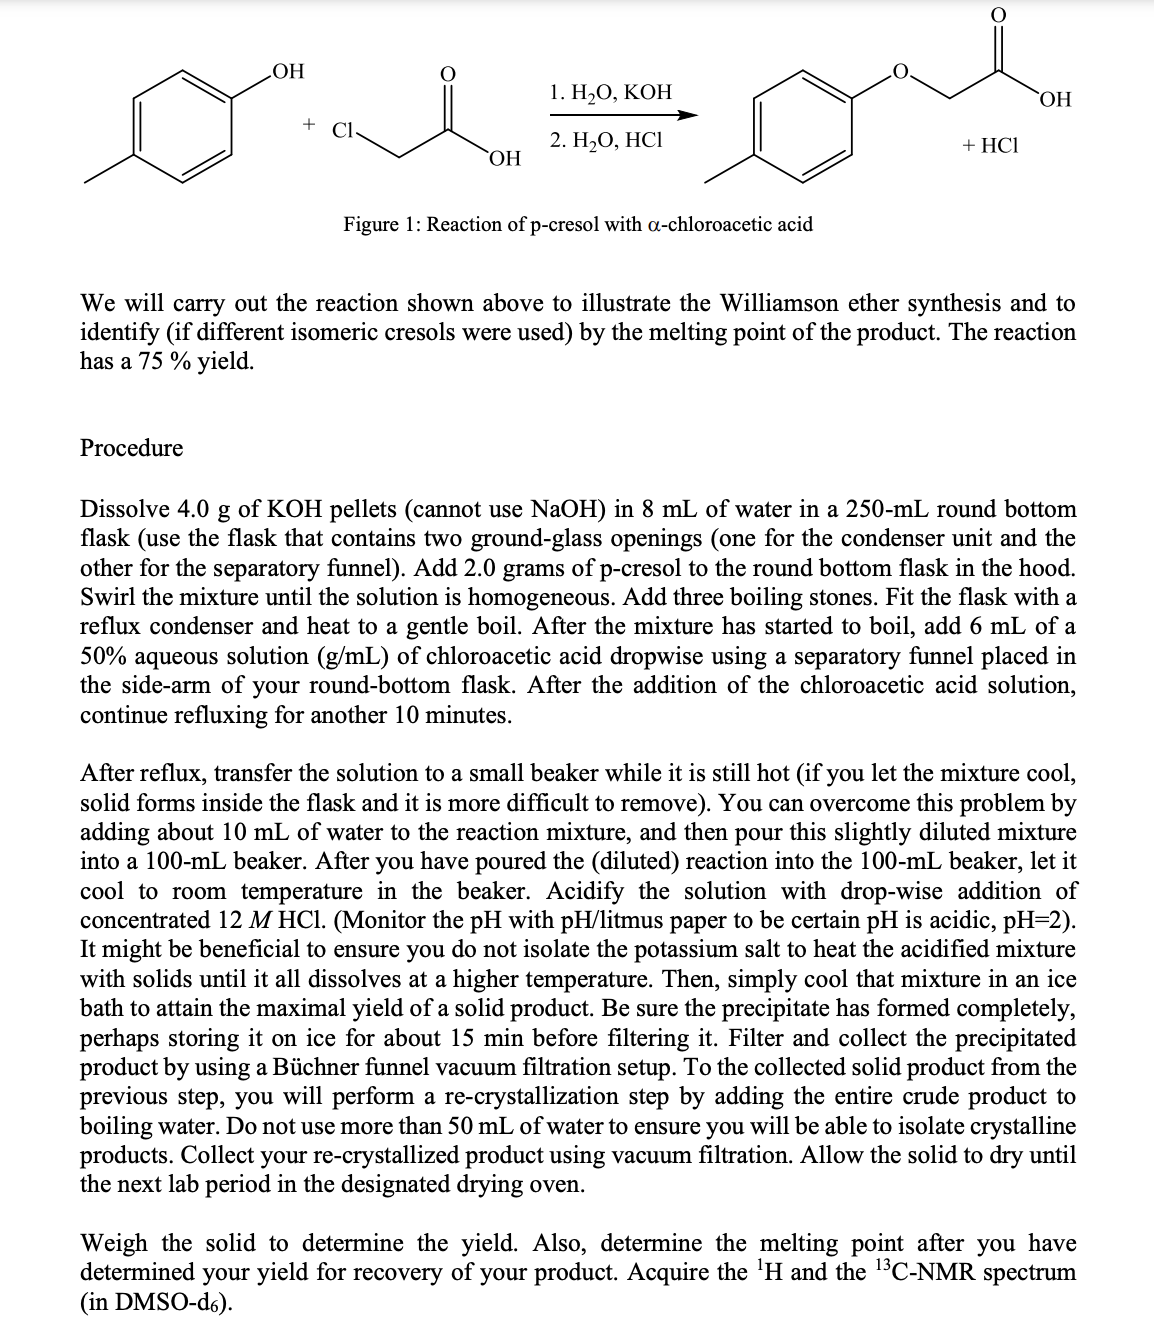 НО
1. Н,О, КОН
+
2. Н,О, НСІ
+ HCІ
HO,
Figure 1: Reaction of p-cresol with a-chloroacetic acid
We will carry out the reaction shown above to illustrate the Williamson ether synthesis and to
identify (if different isomeric cresols were used) by the melting point of the product. The reaction
has a 75 % yield.
Procedure
Dissolve 4.0
g
of KOH pellets (cannot use NaOH) in 8 mL of water in a 250-mL round bottom
flask (use the flask that contains two ground-glass openings (one for the condenser unit and the
other for the separatory funnel). Add 2.0 grams of p-cresol to the round bottom flask in the hood.
Swirl the mixture until the solution is homogeneous. Add three boiling stones. Fit the flask with a
reflux condenser and heat to a gentle boil. After the mixture has started to boil, add 6 mL of a
50% aqueous solution (g/mL) of chloroacetic acid dropwise using a separatory funnel placed in
the side-arm of your round-bottom flask. After the addition of the chloroacetic acid solution,
continue refluxing for another 10 minutes.
After reflux, transfer the solution to a small beaker while it is still hot (if you let the mixture cool,
solid forms inside the flask and it is more difficult to remove). You can overcome this problem by
adding about 10 mL of water to the reaction mixture, and then pour this slightly diluted mixture
into a 100-mL beaker. After you have poured the (diluted) reaction into the 100-mL beaker, let it
cool to room temperature in the beaker. Acidify the solution with drop-wise addition of
concentrated 12 M HCI. (Monitor the pH with pH/litmus paper to be certain pH is acidic, pH=2).
It might be beneficial to ensure you do not isolate the potassium salt to heat the acidified mixture
with solids until it all dissolves at a higher temperature. Then, simply cool that mixture in an ice
bath to attain the maximal yield of a solid product. Be sure the precipitate has formed completely,
perhaps storing it on ice for about 15 min before filtering it. Filter and collect the precipitated
product by using a Büchner funnel vacuum filtration setup. To the collected solid product from the
previous step, you will perform a re-crystallization step by adding the entire crude product to
boiling water. Do not use more than 50 mL of water to ensure you will be able to isolate crystalline
products. Collect your re-crystallized product using vacuum filtration. Allow the solid to dry until
the next lab period in the designated drying oven.
Weigh the solid to determine the yield. Also, determine the melting point after you have
determined your yield for recovery of your product. Acquire the 'H and the 1C-NMR spectrum
(in DMSO-ds).
